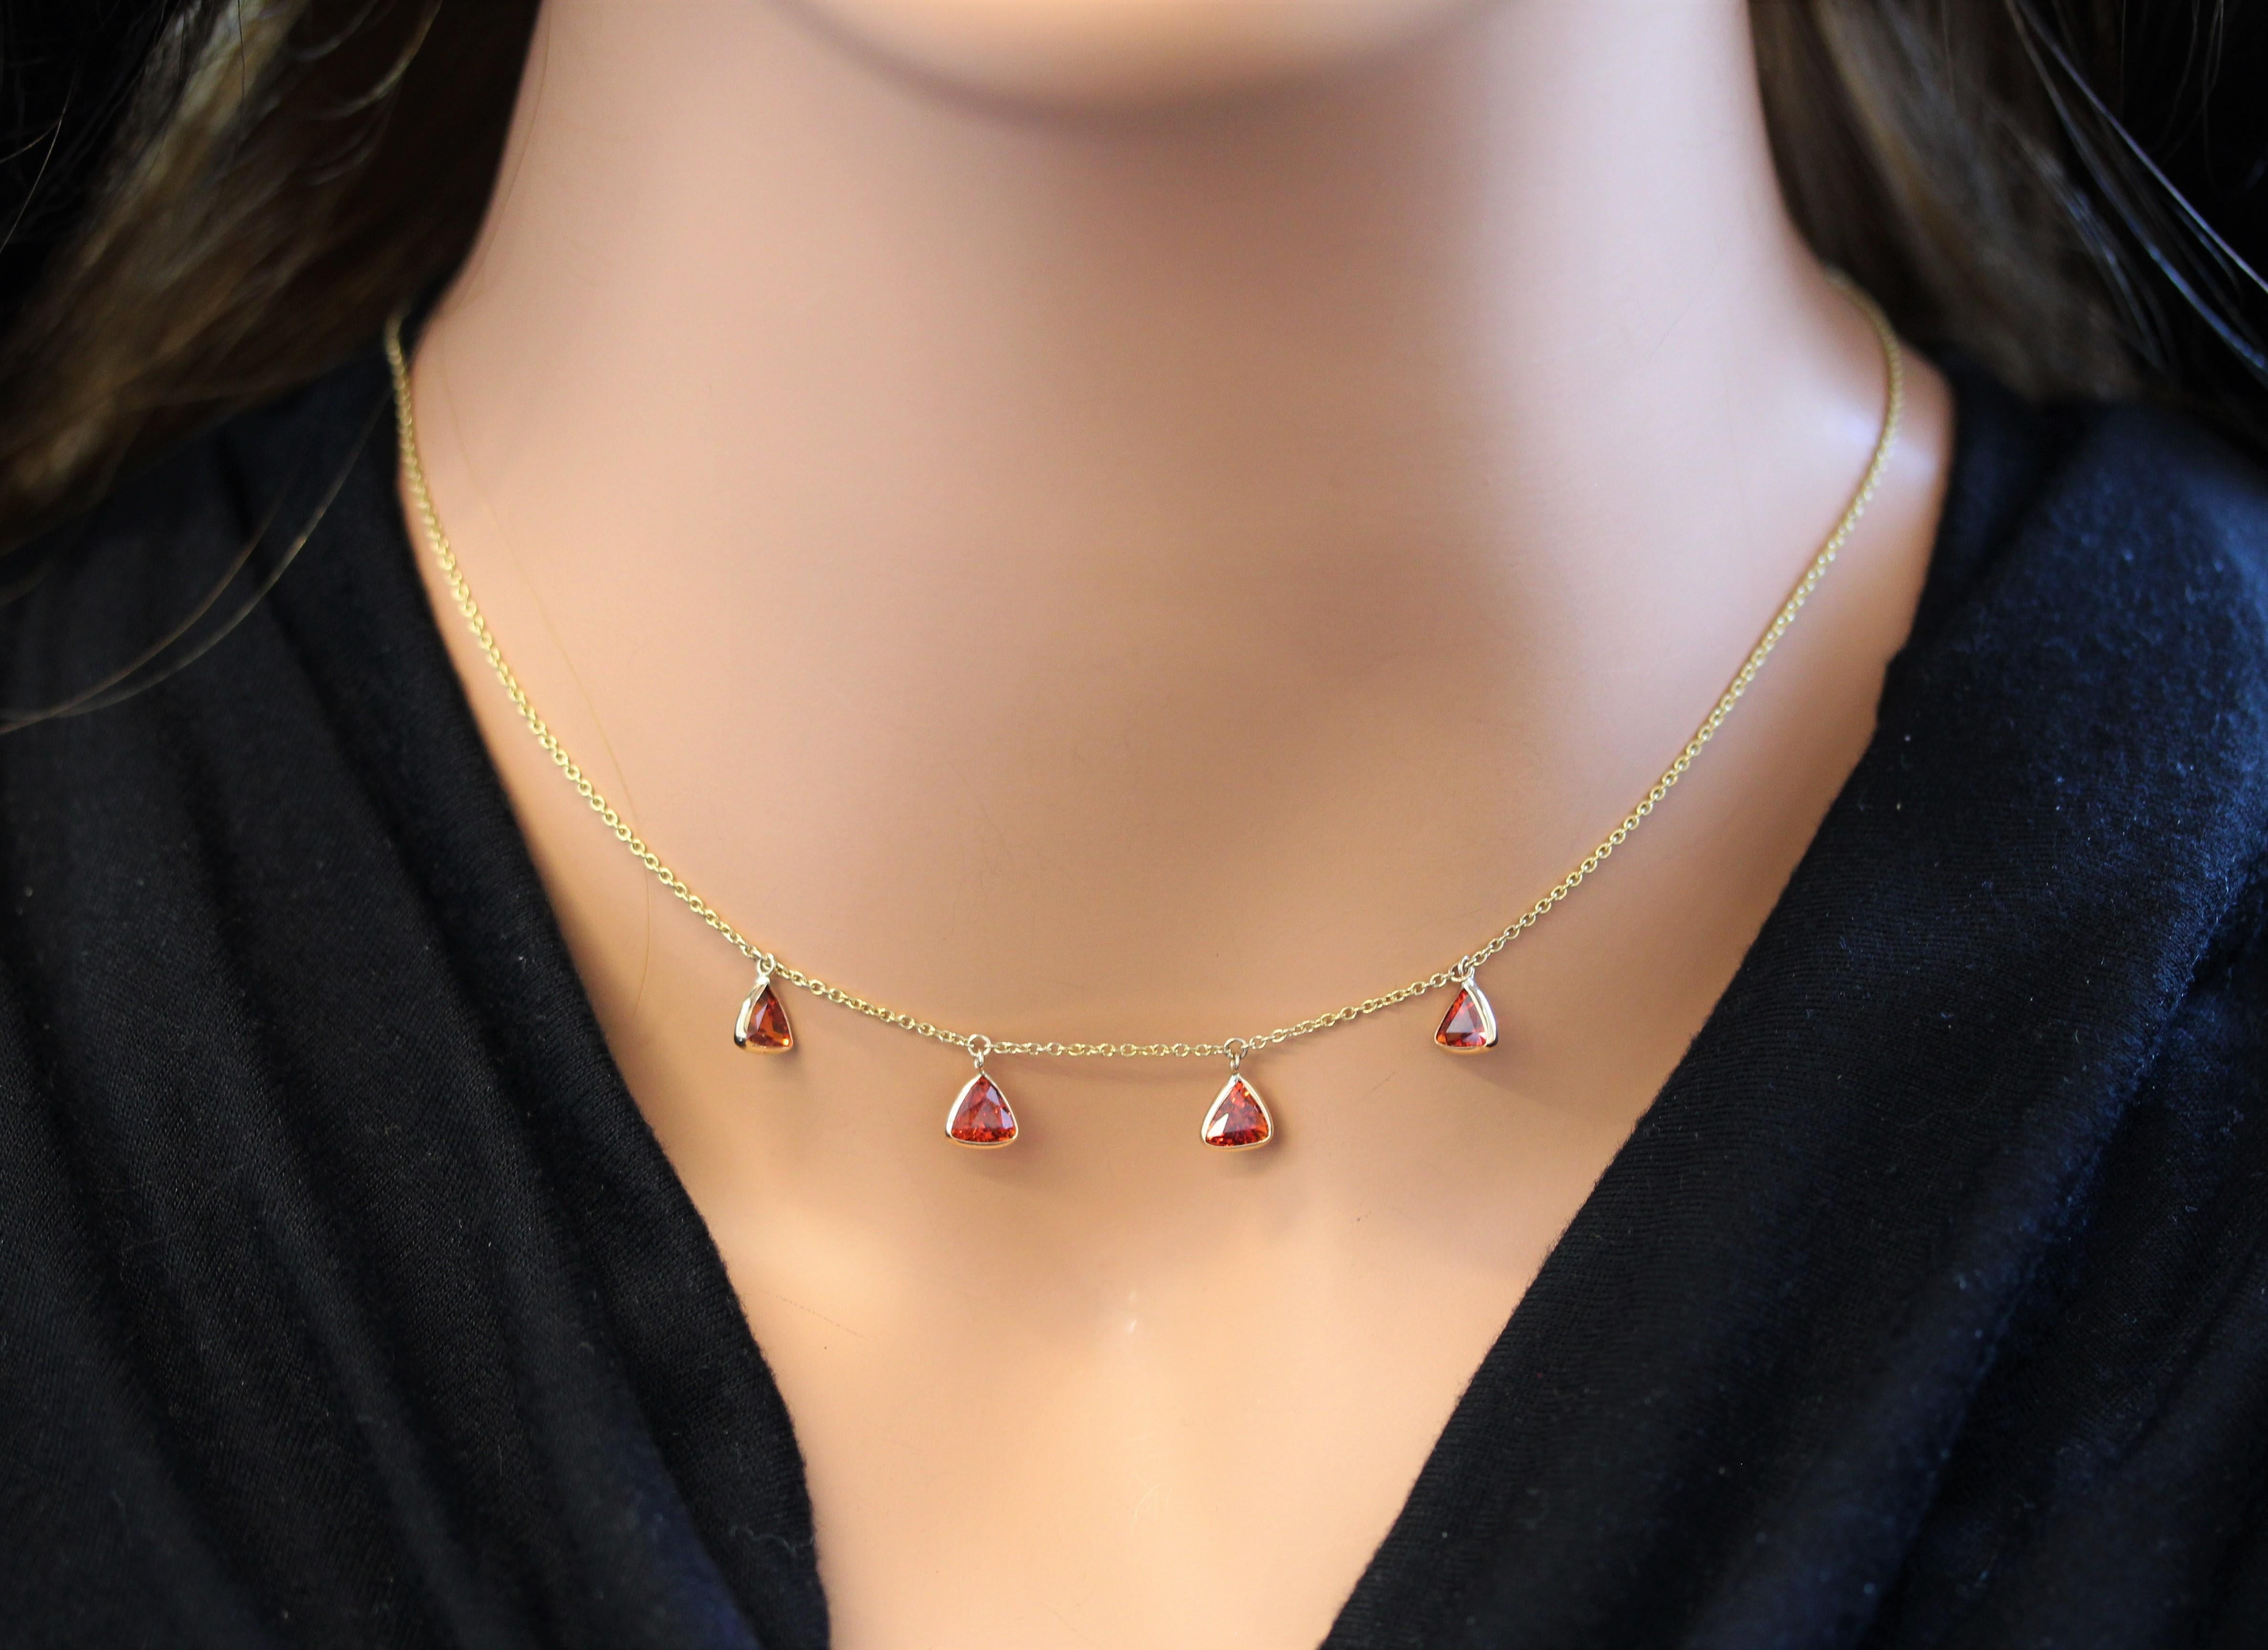 Make a statement worn solo and level up your collar candy when layered. How would you wear it? This is a natural Trilliant , Gemstone Spessartite, Orangy Red, handmade necklace wire-wrapped in 14k yellow gold. This is a piece you'll wear forever. We